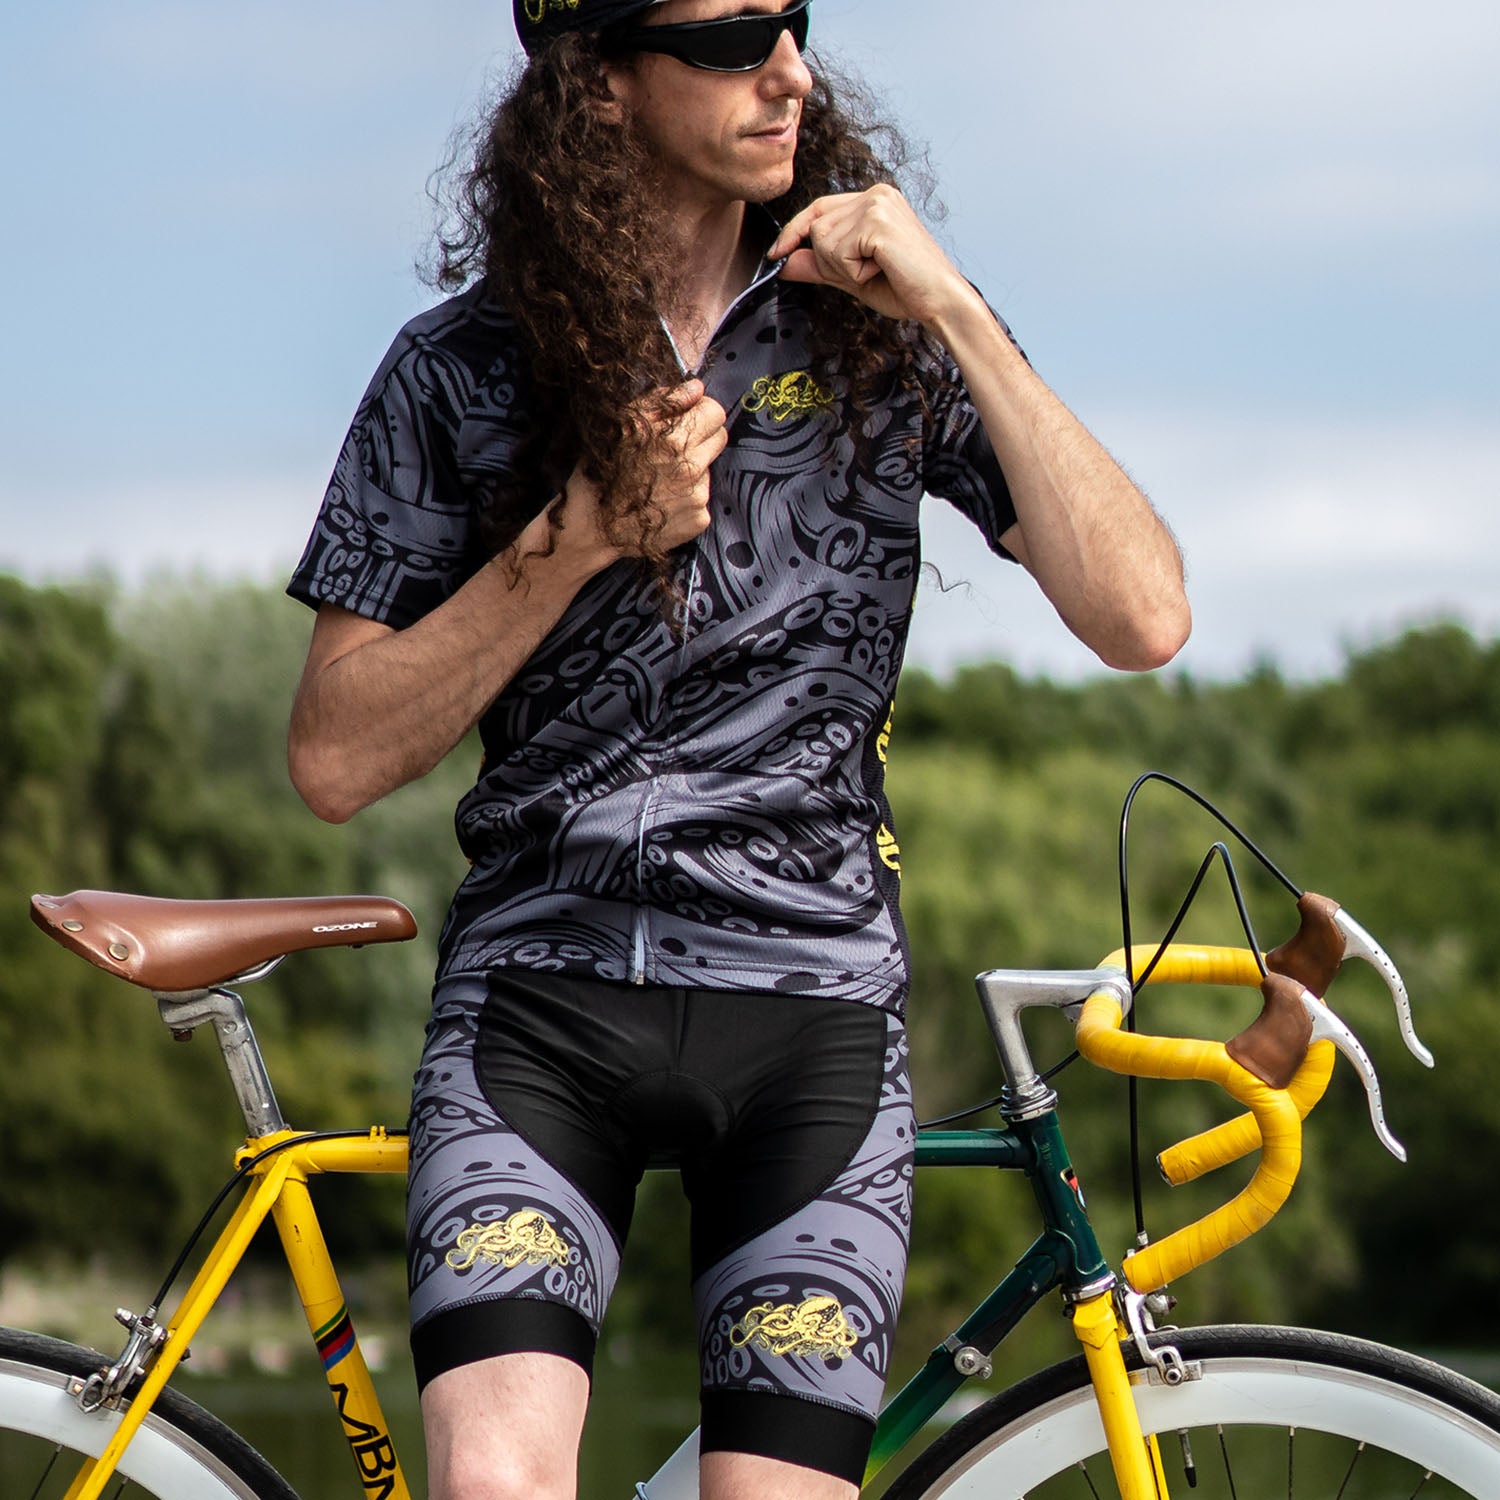 Men's The Black Octopus 2 Piece Cycling Kit